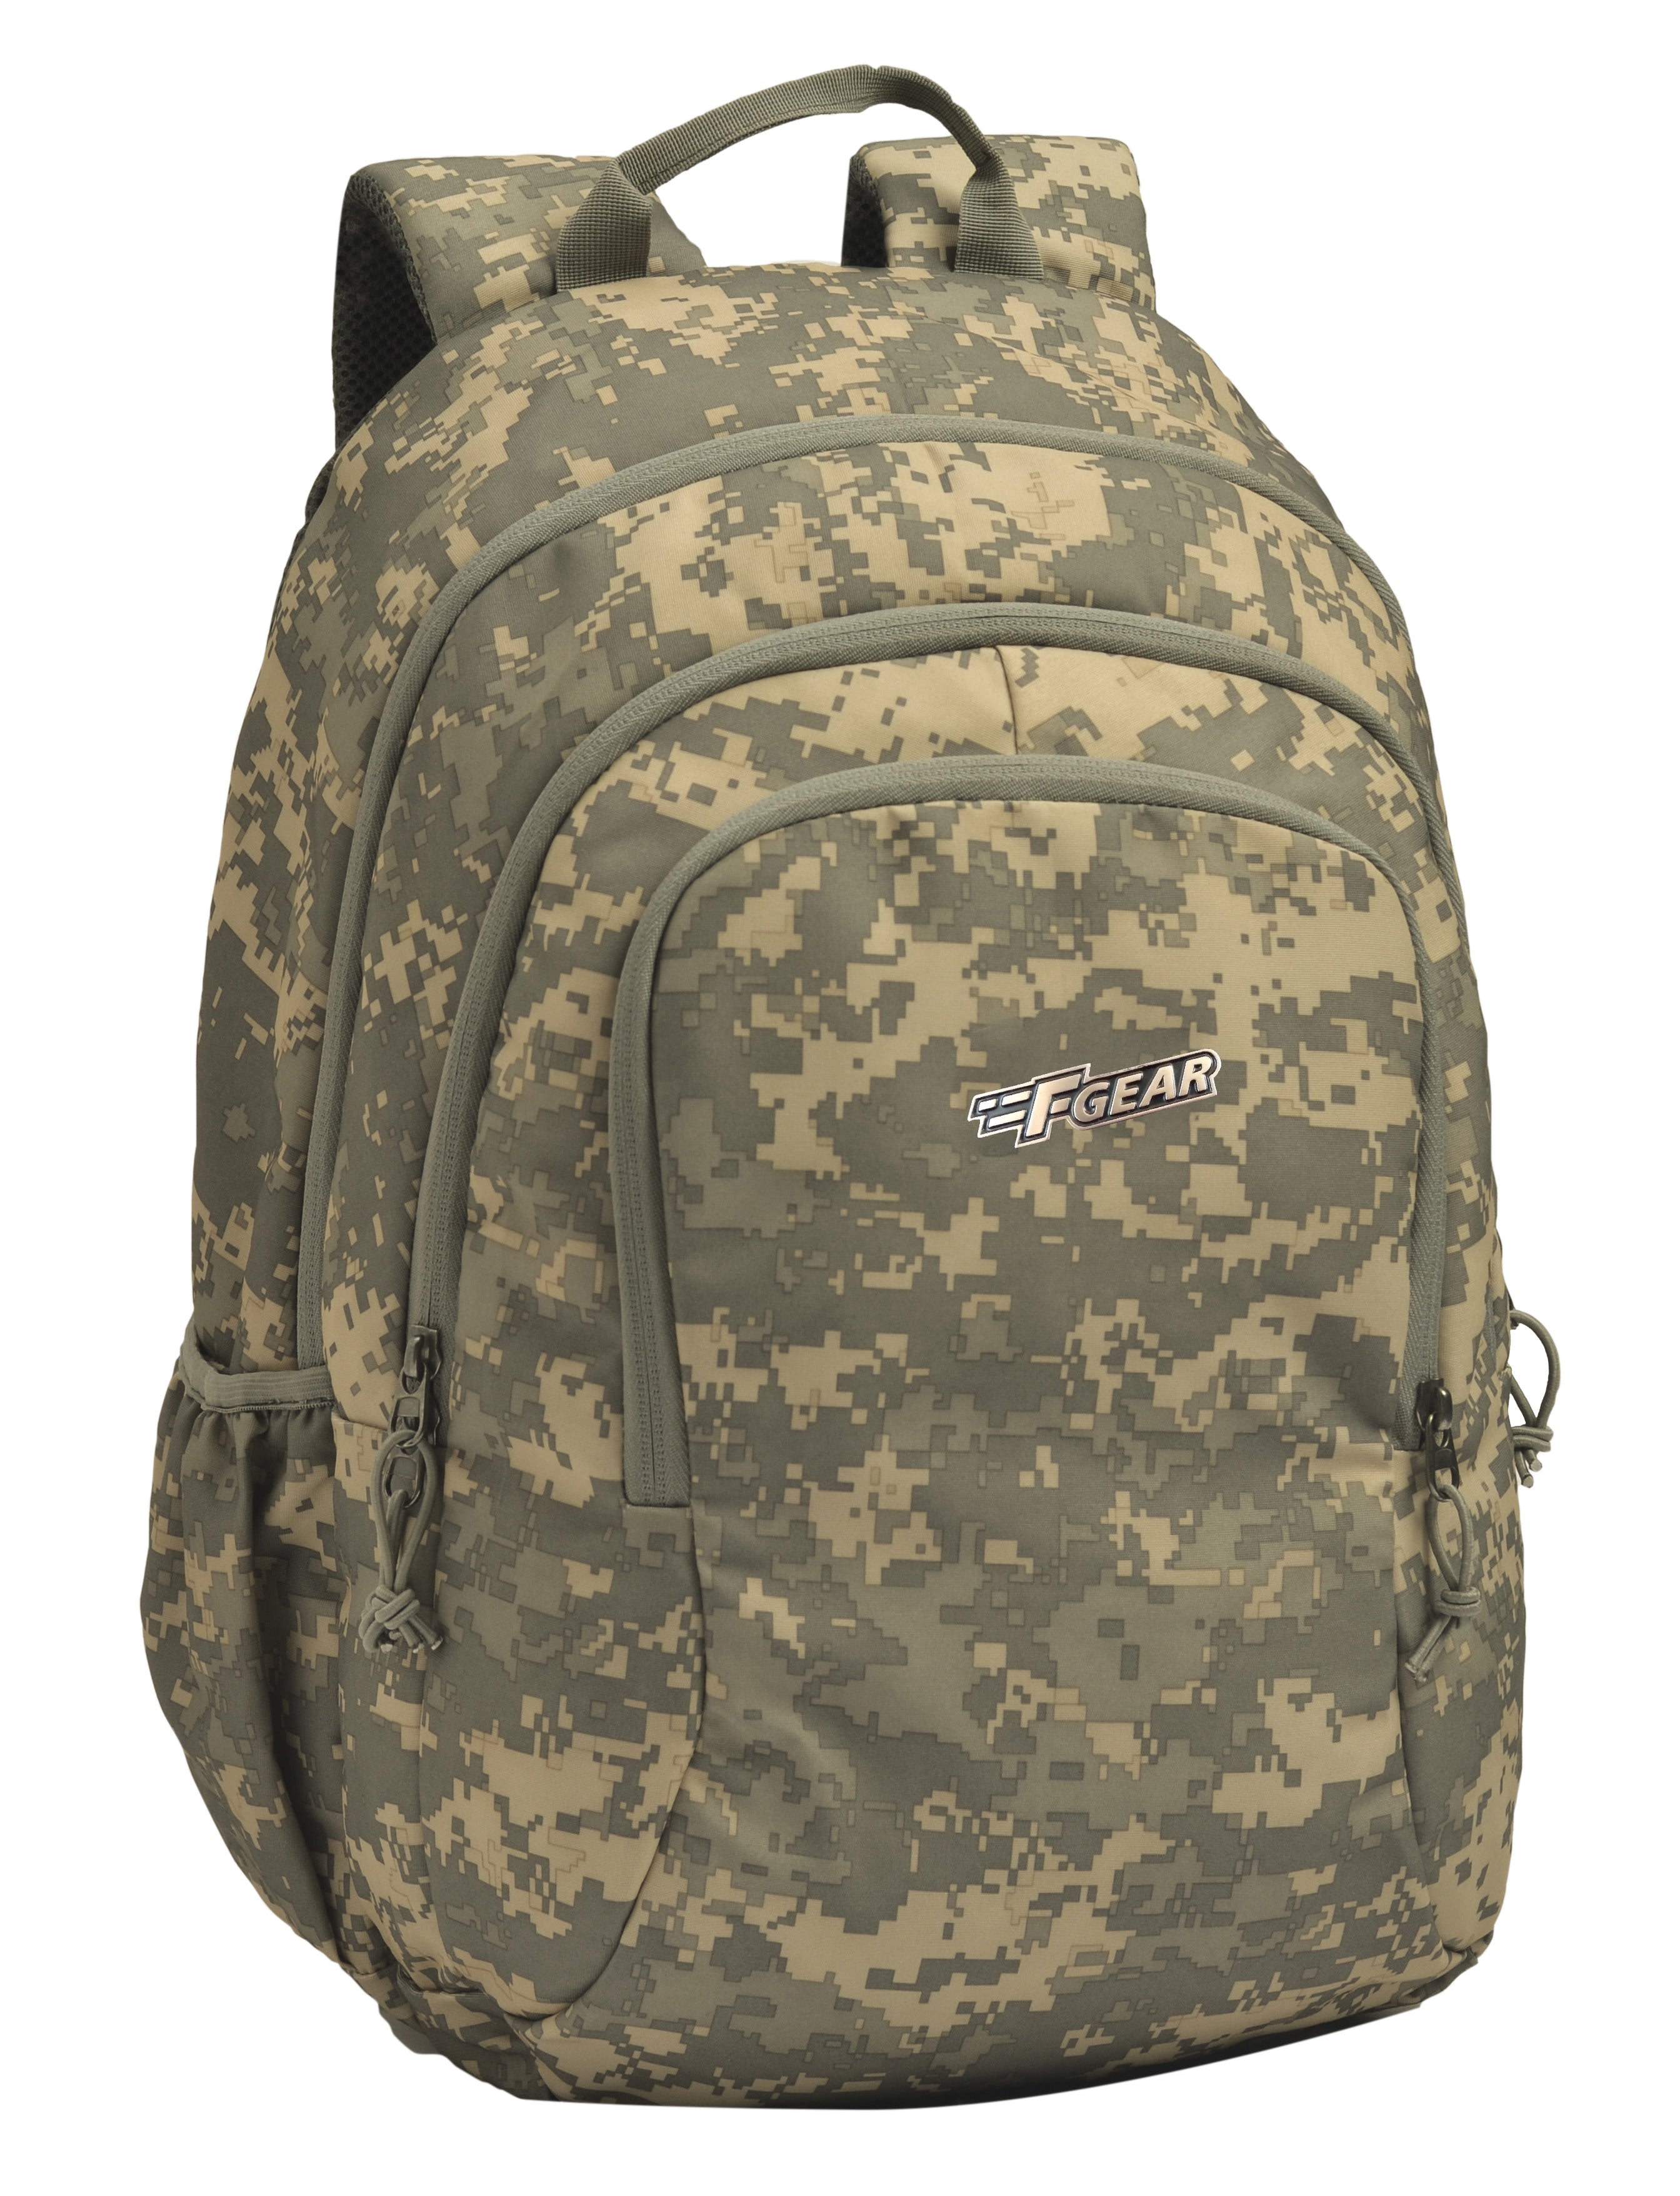 Aisa Girls Camouflage Printing Backpack Handbag Nylon Mini Casual Daypack  Shoulder Bag Purse (Camouflage) : Amazon.in: Bags, Wallets and Luggage